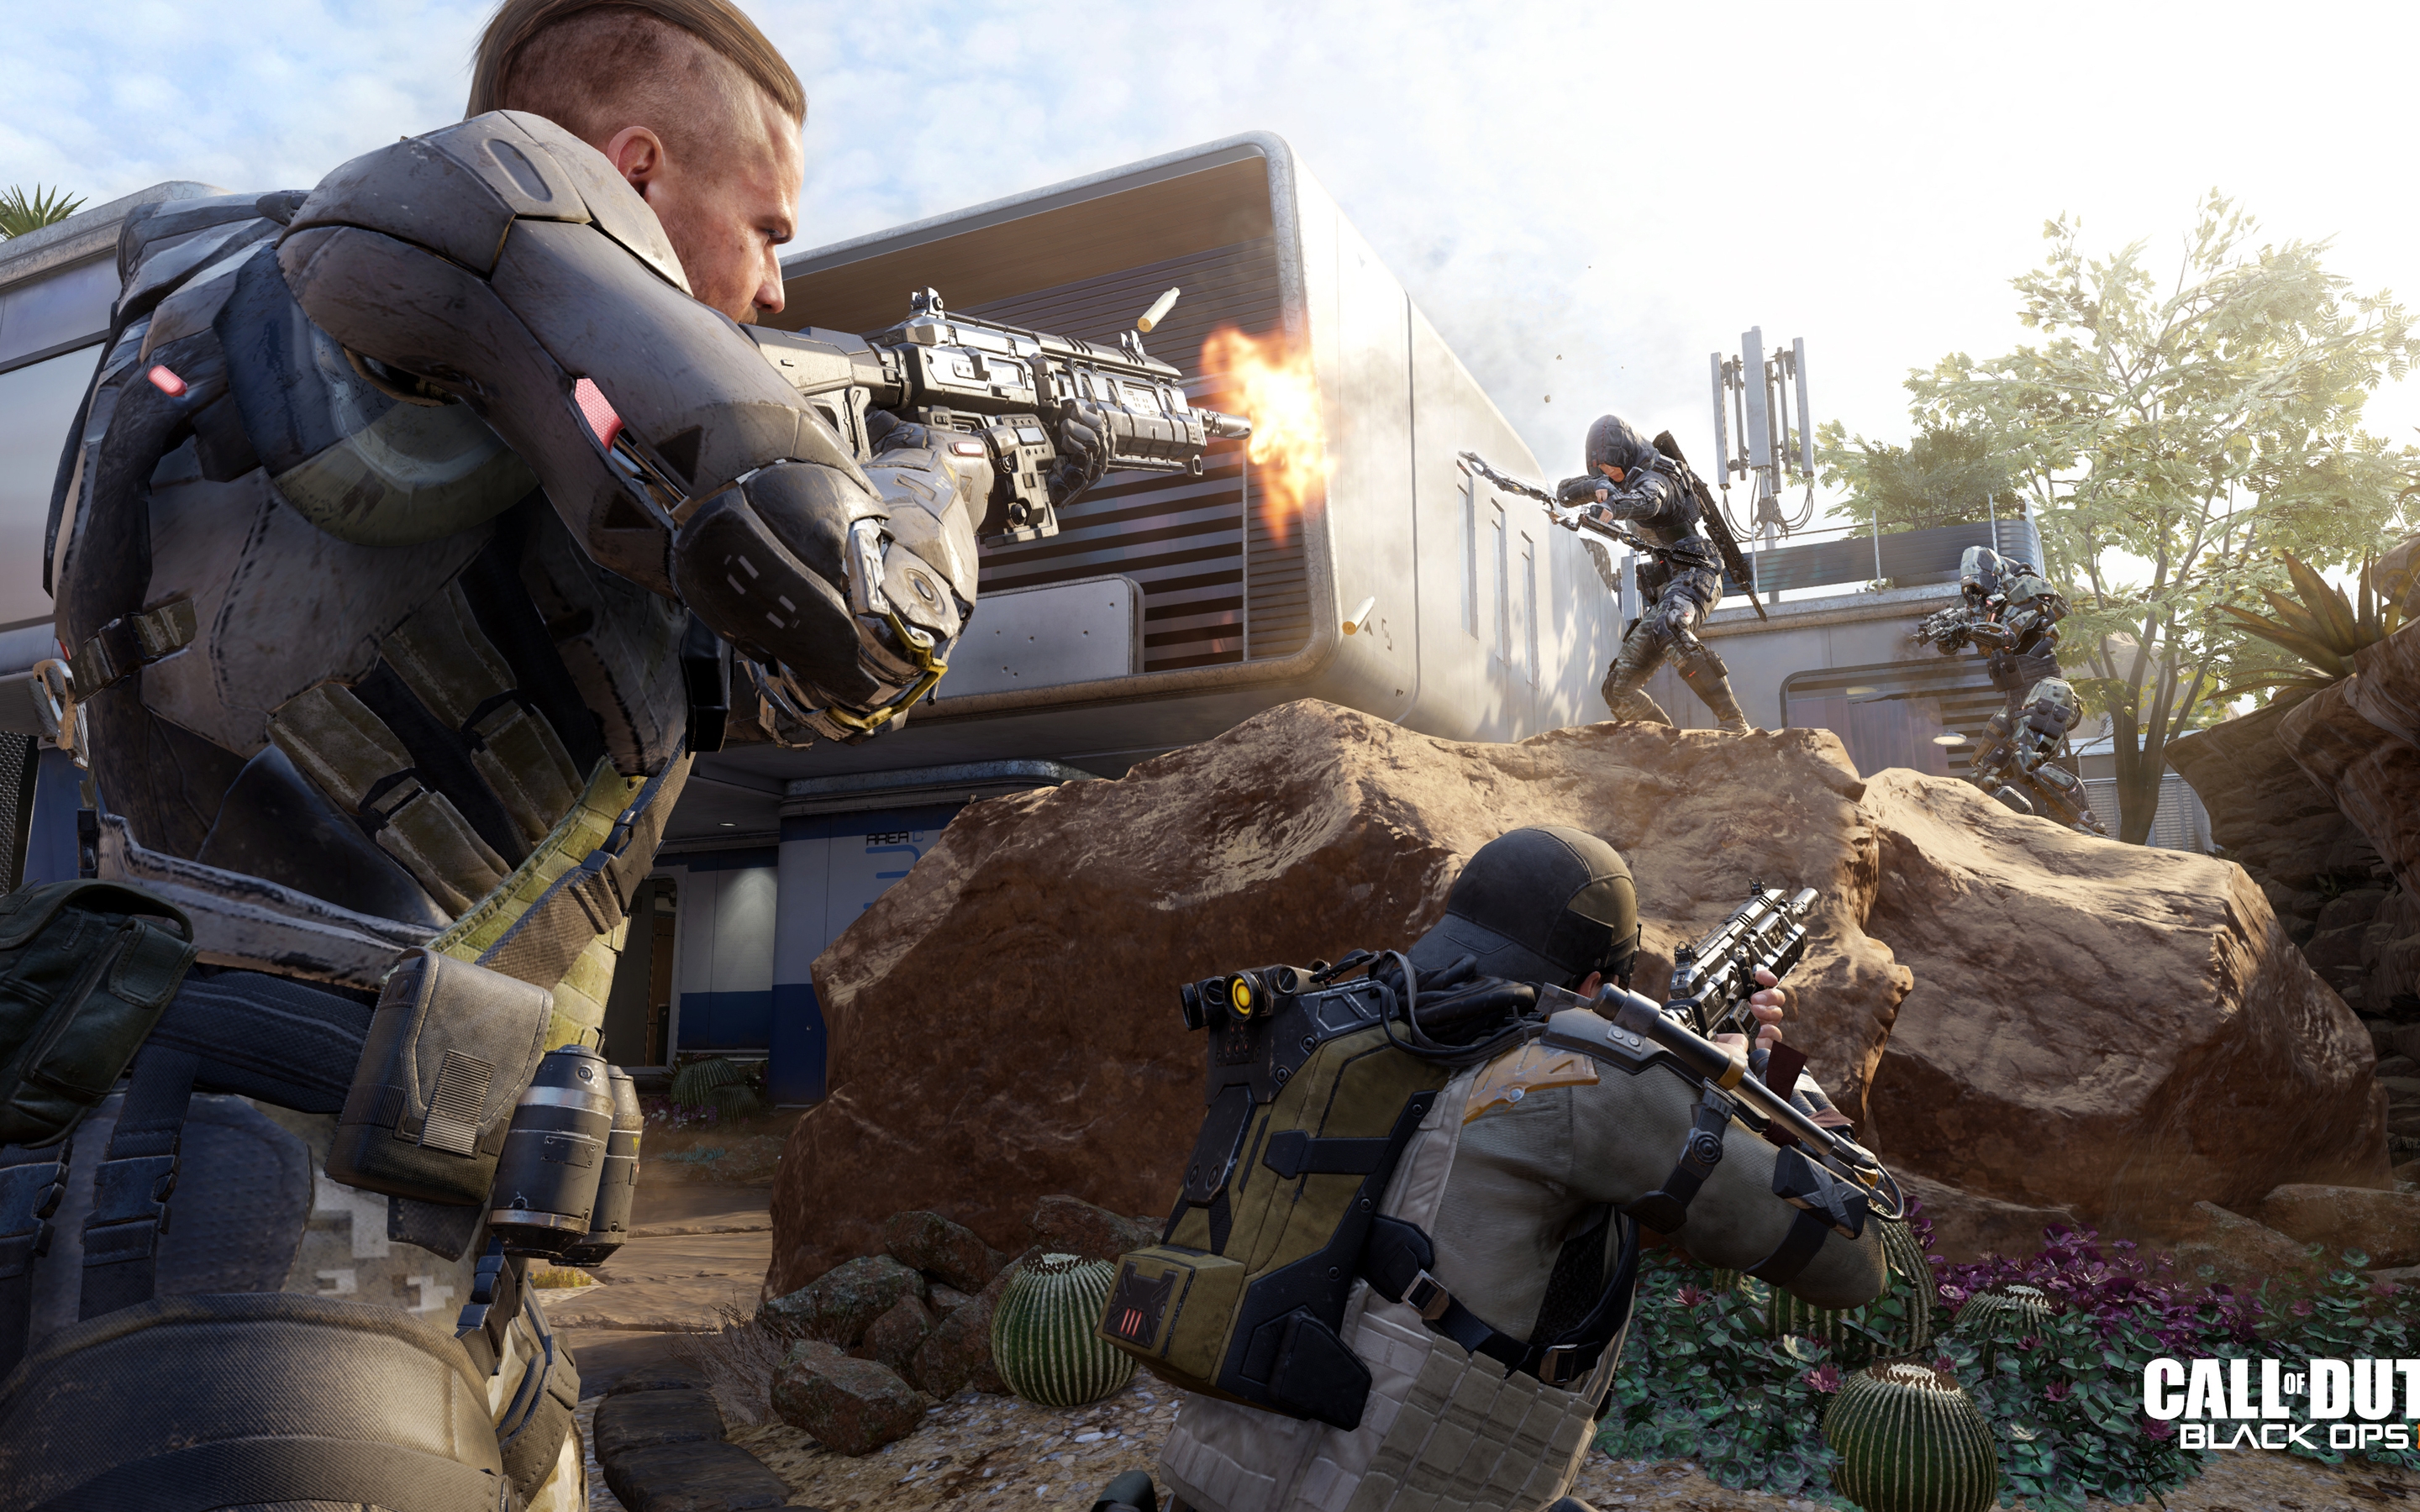 Call of Duty Black Ops III Fight for 2880 x 1800 Retina Display resolution